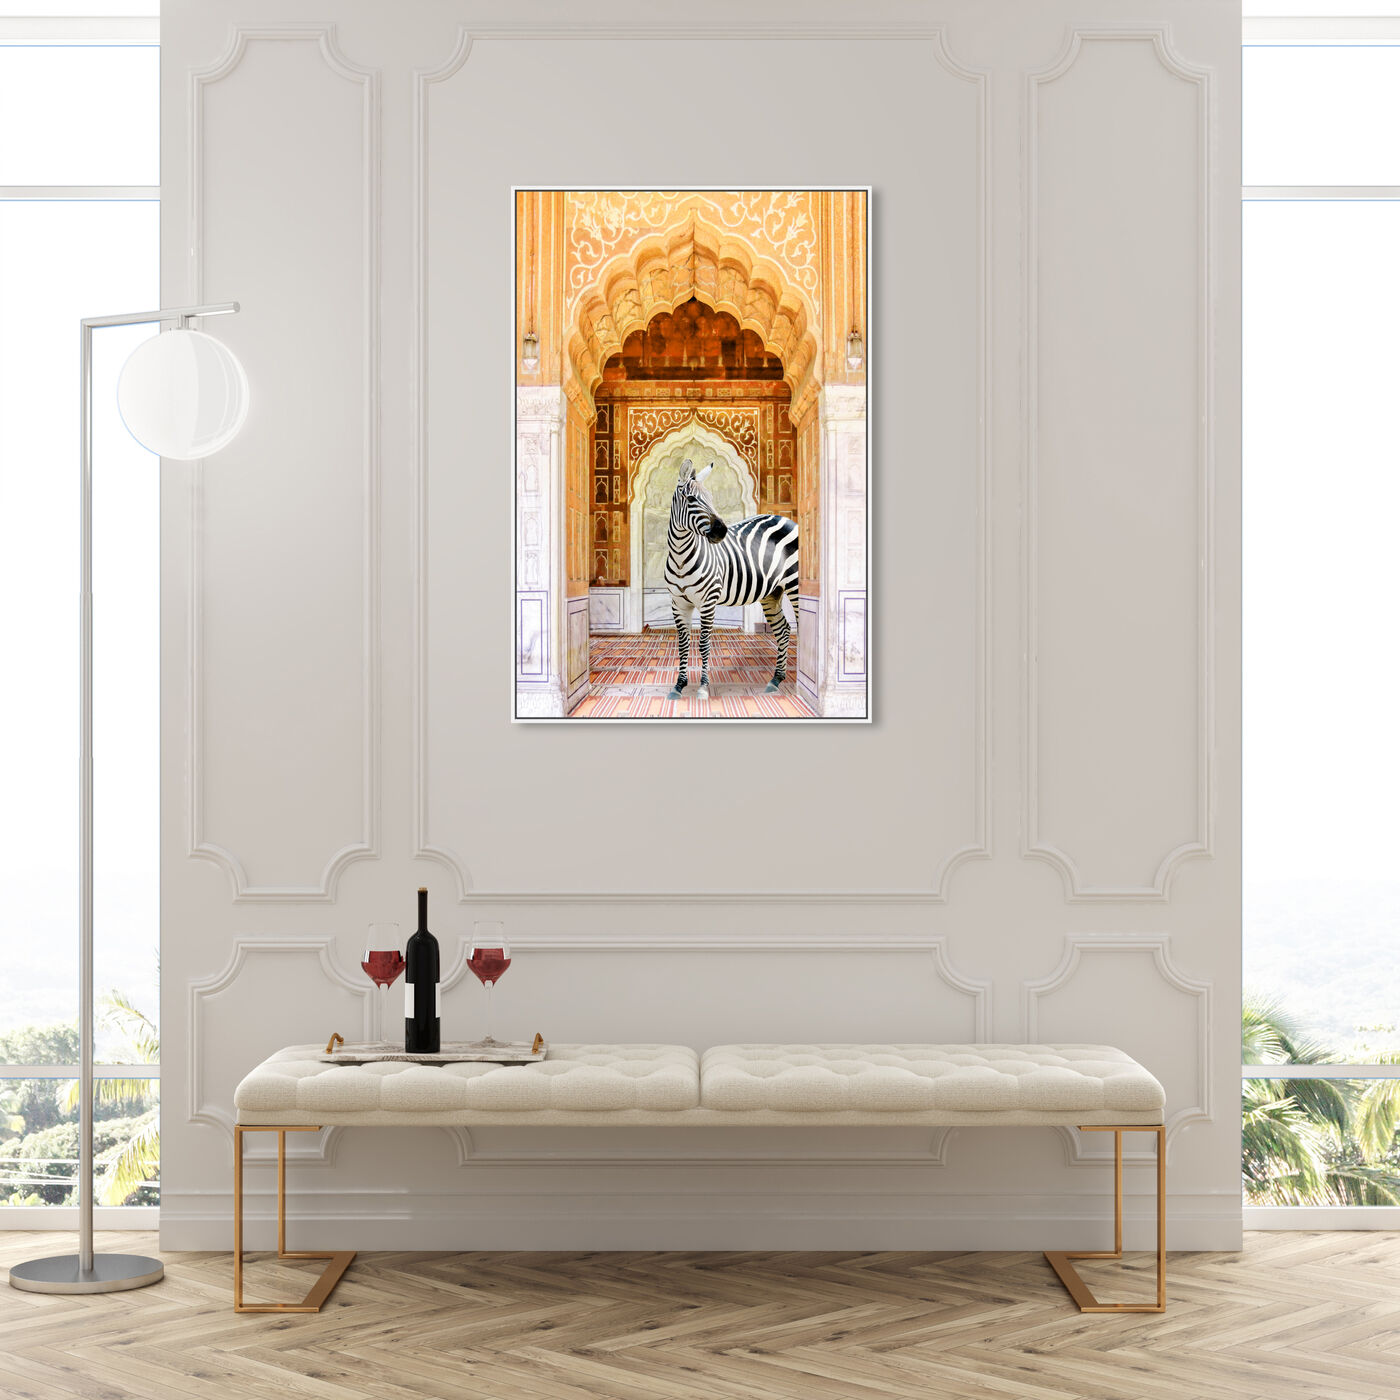 Hanging view of Zebra Entryway featuring architecture and buildings and structures art.